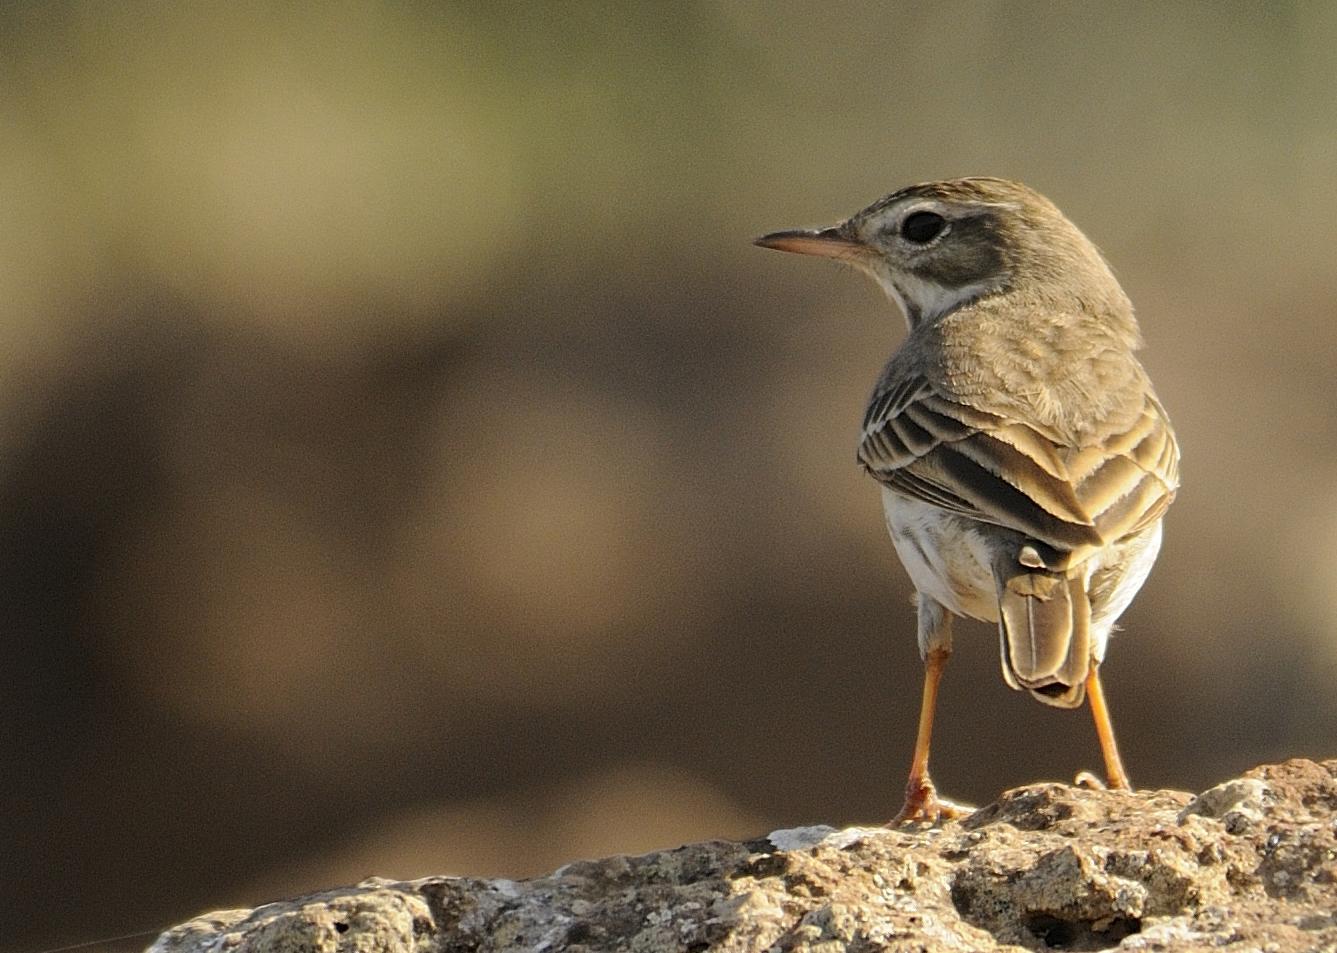 Berthelot's Pipit Photo by Andres Rios